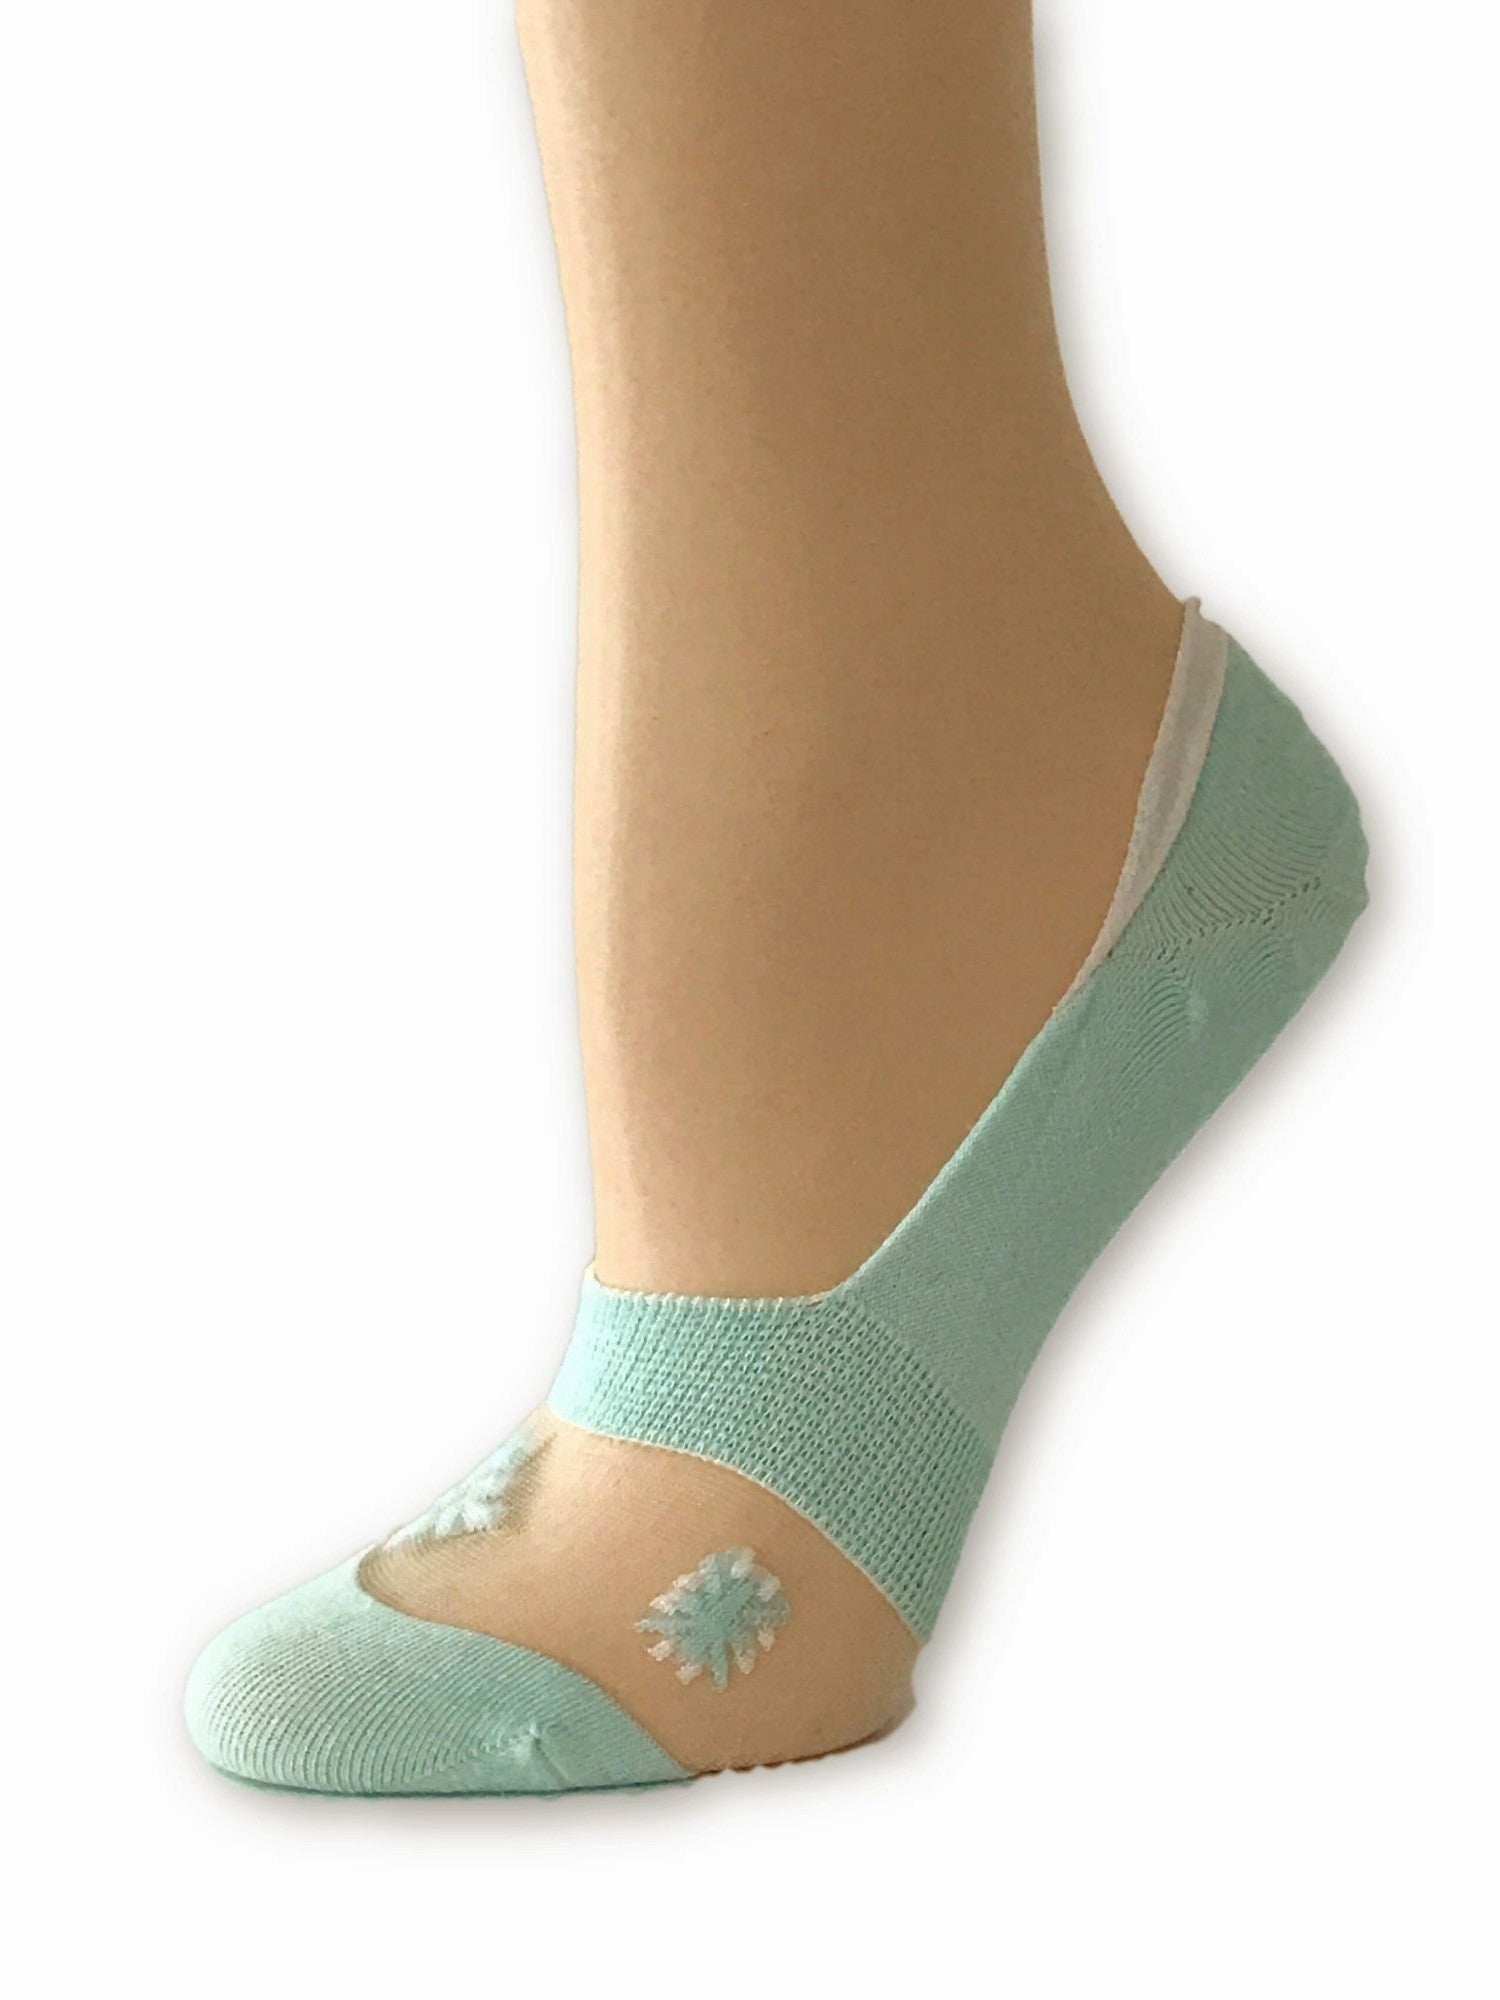 One-Stripped Turquoise Ankle Sheer Socks - Global Trendz Fashion®